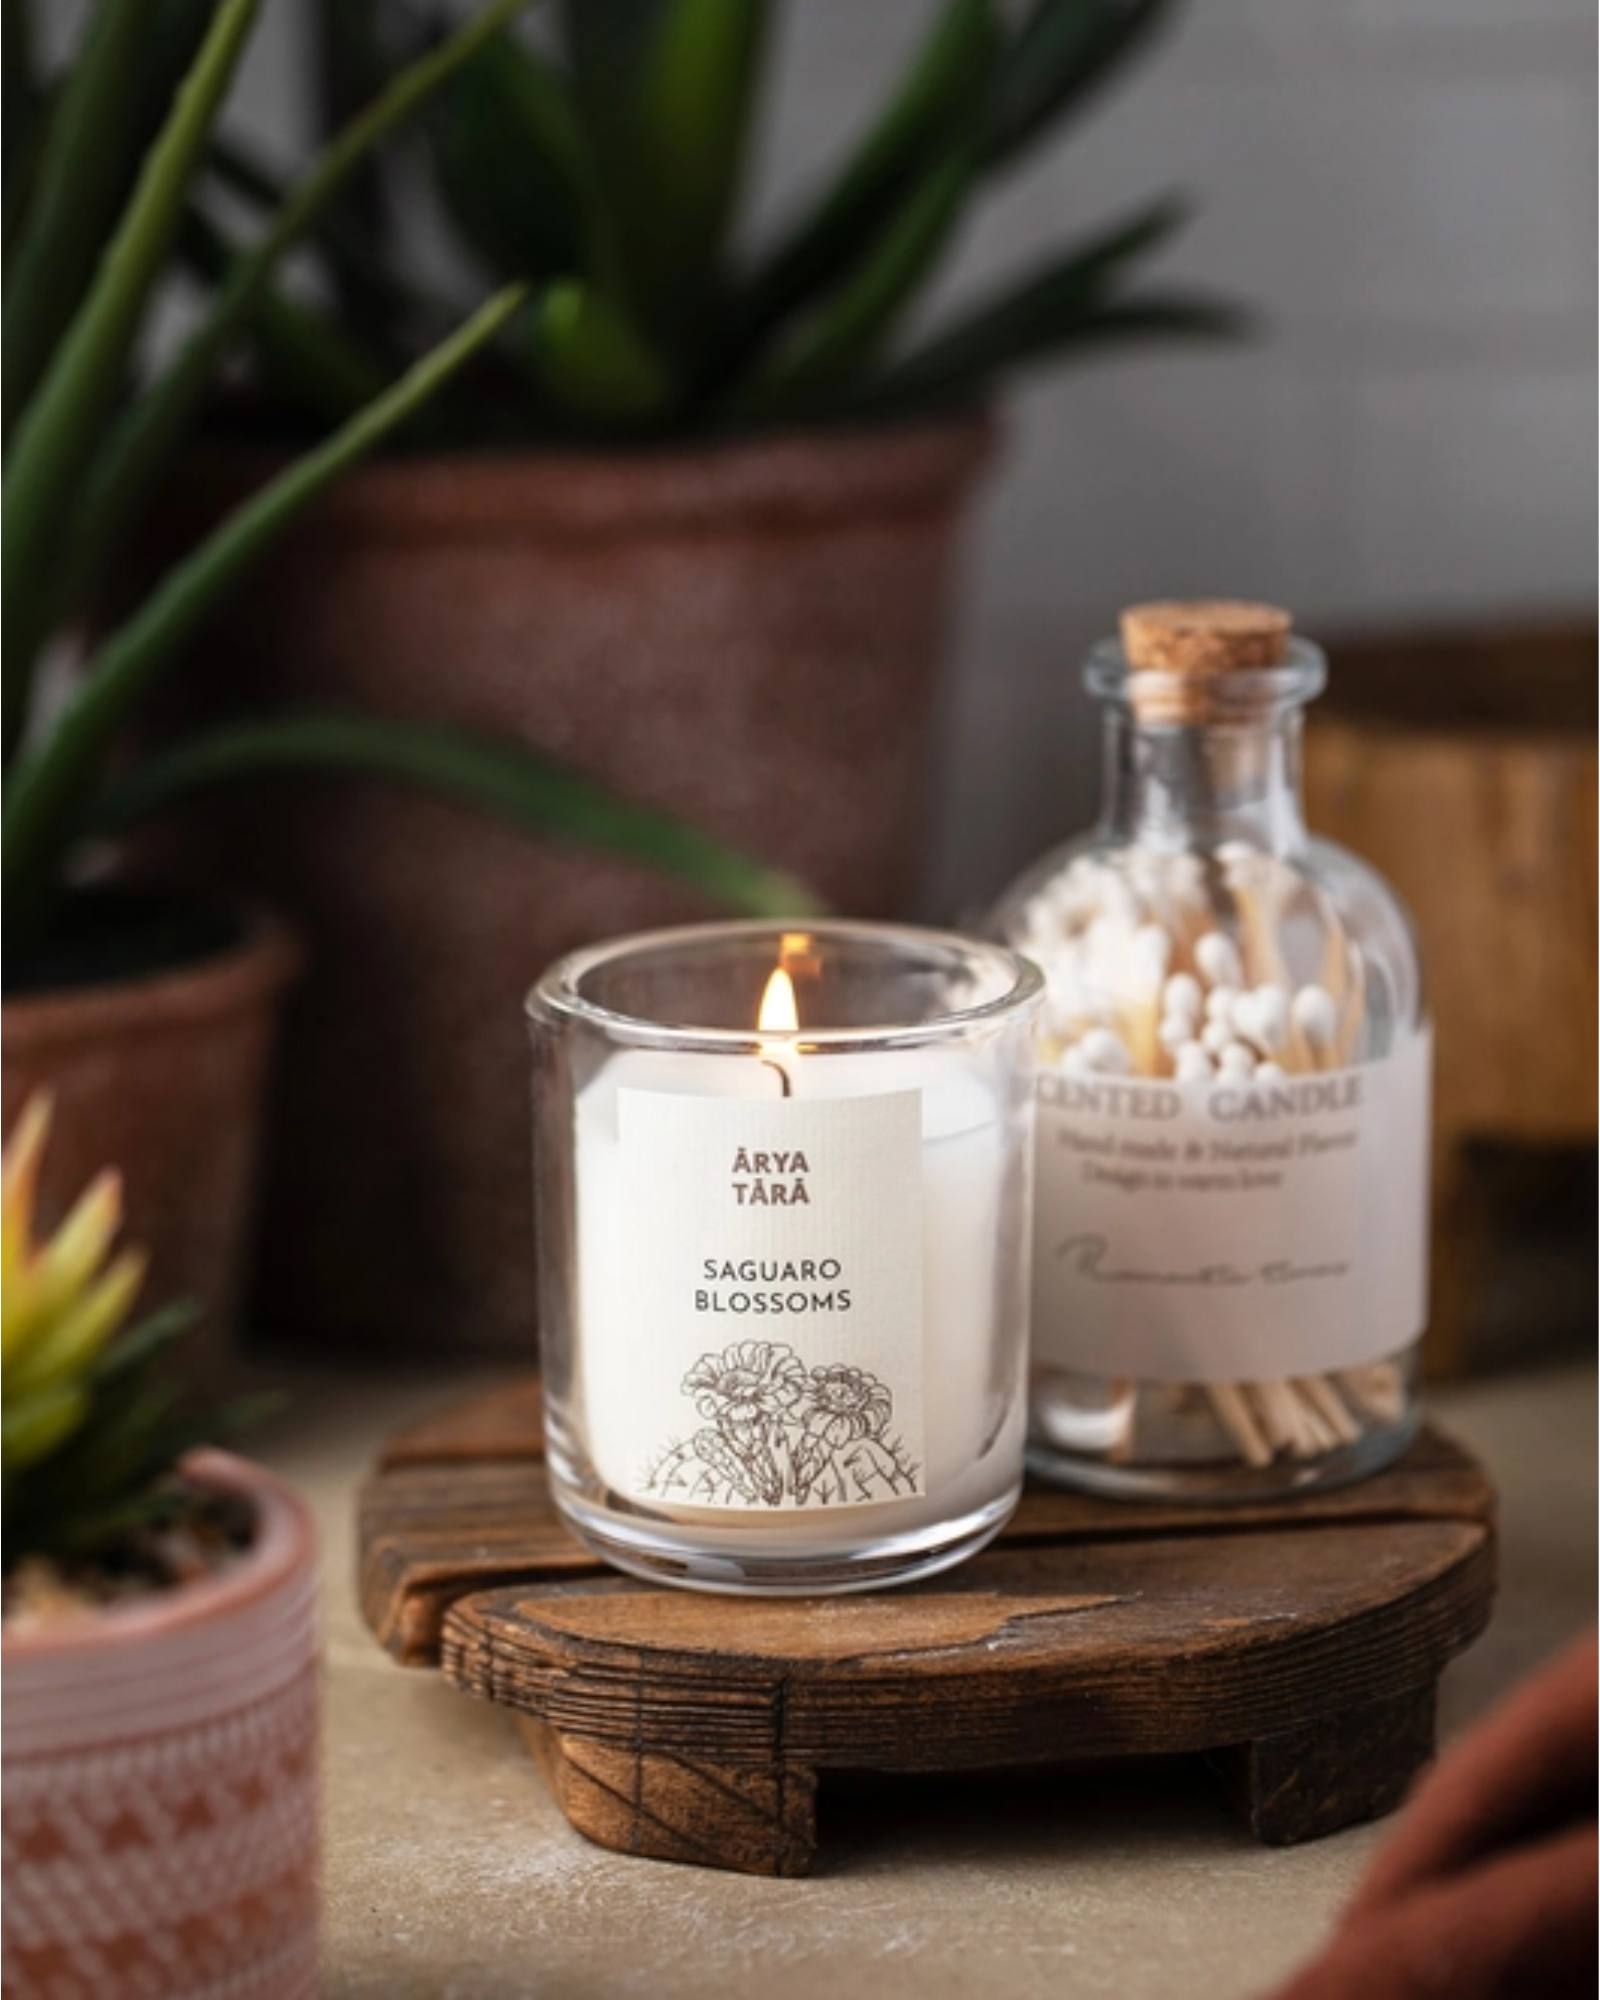 Lit saguaro blossom candle on a wood pedestal in front of a jar of candles